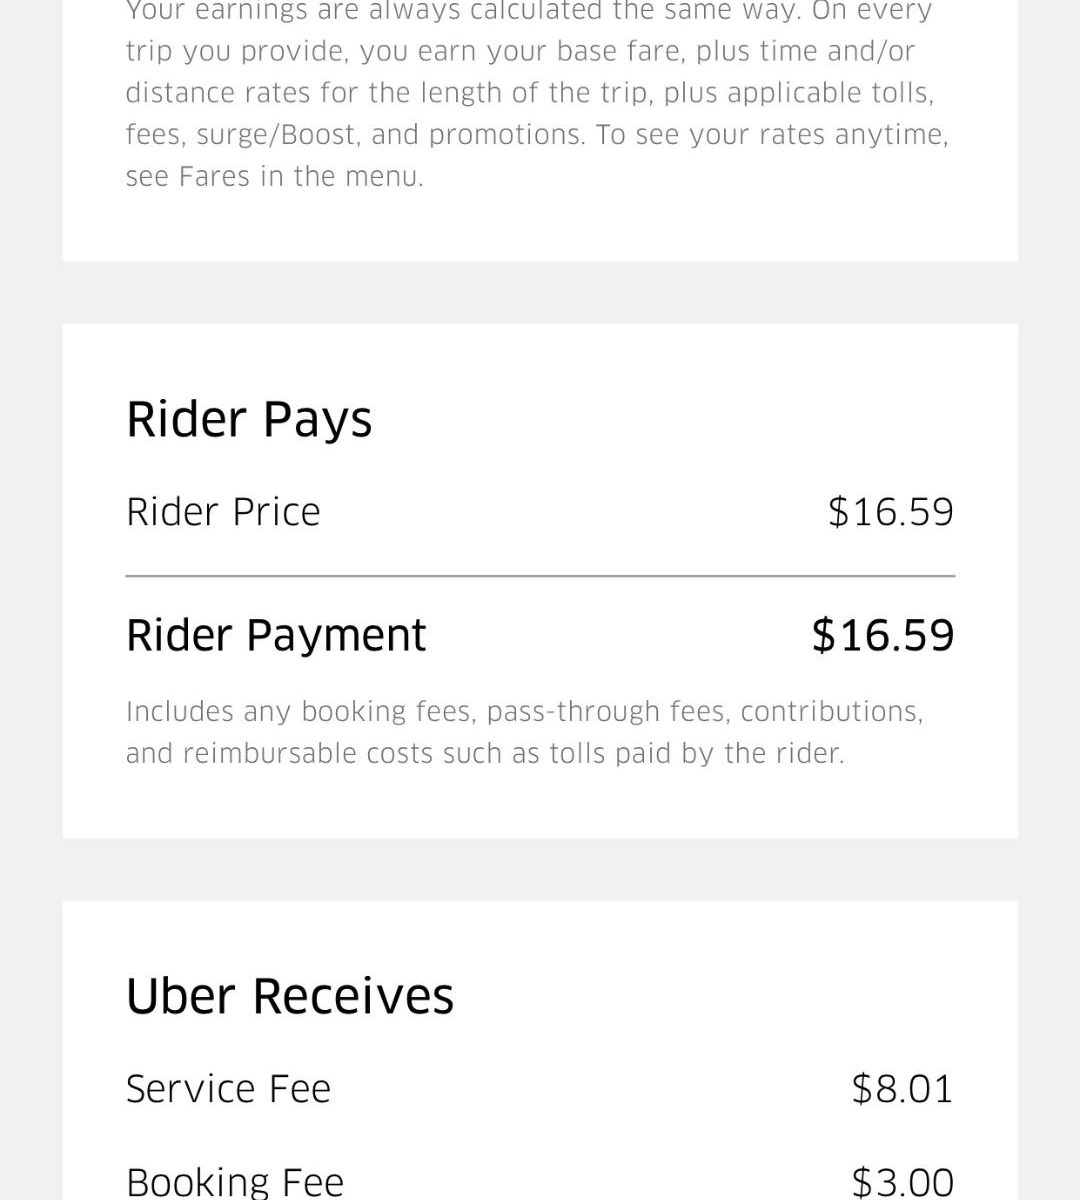 A screenshot of the uber app 's pricing.